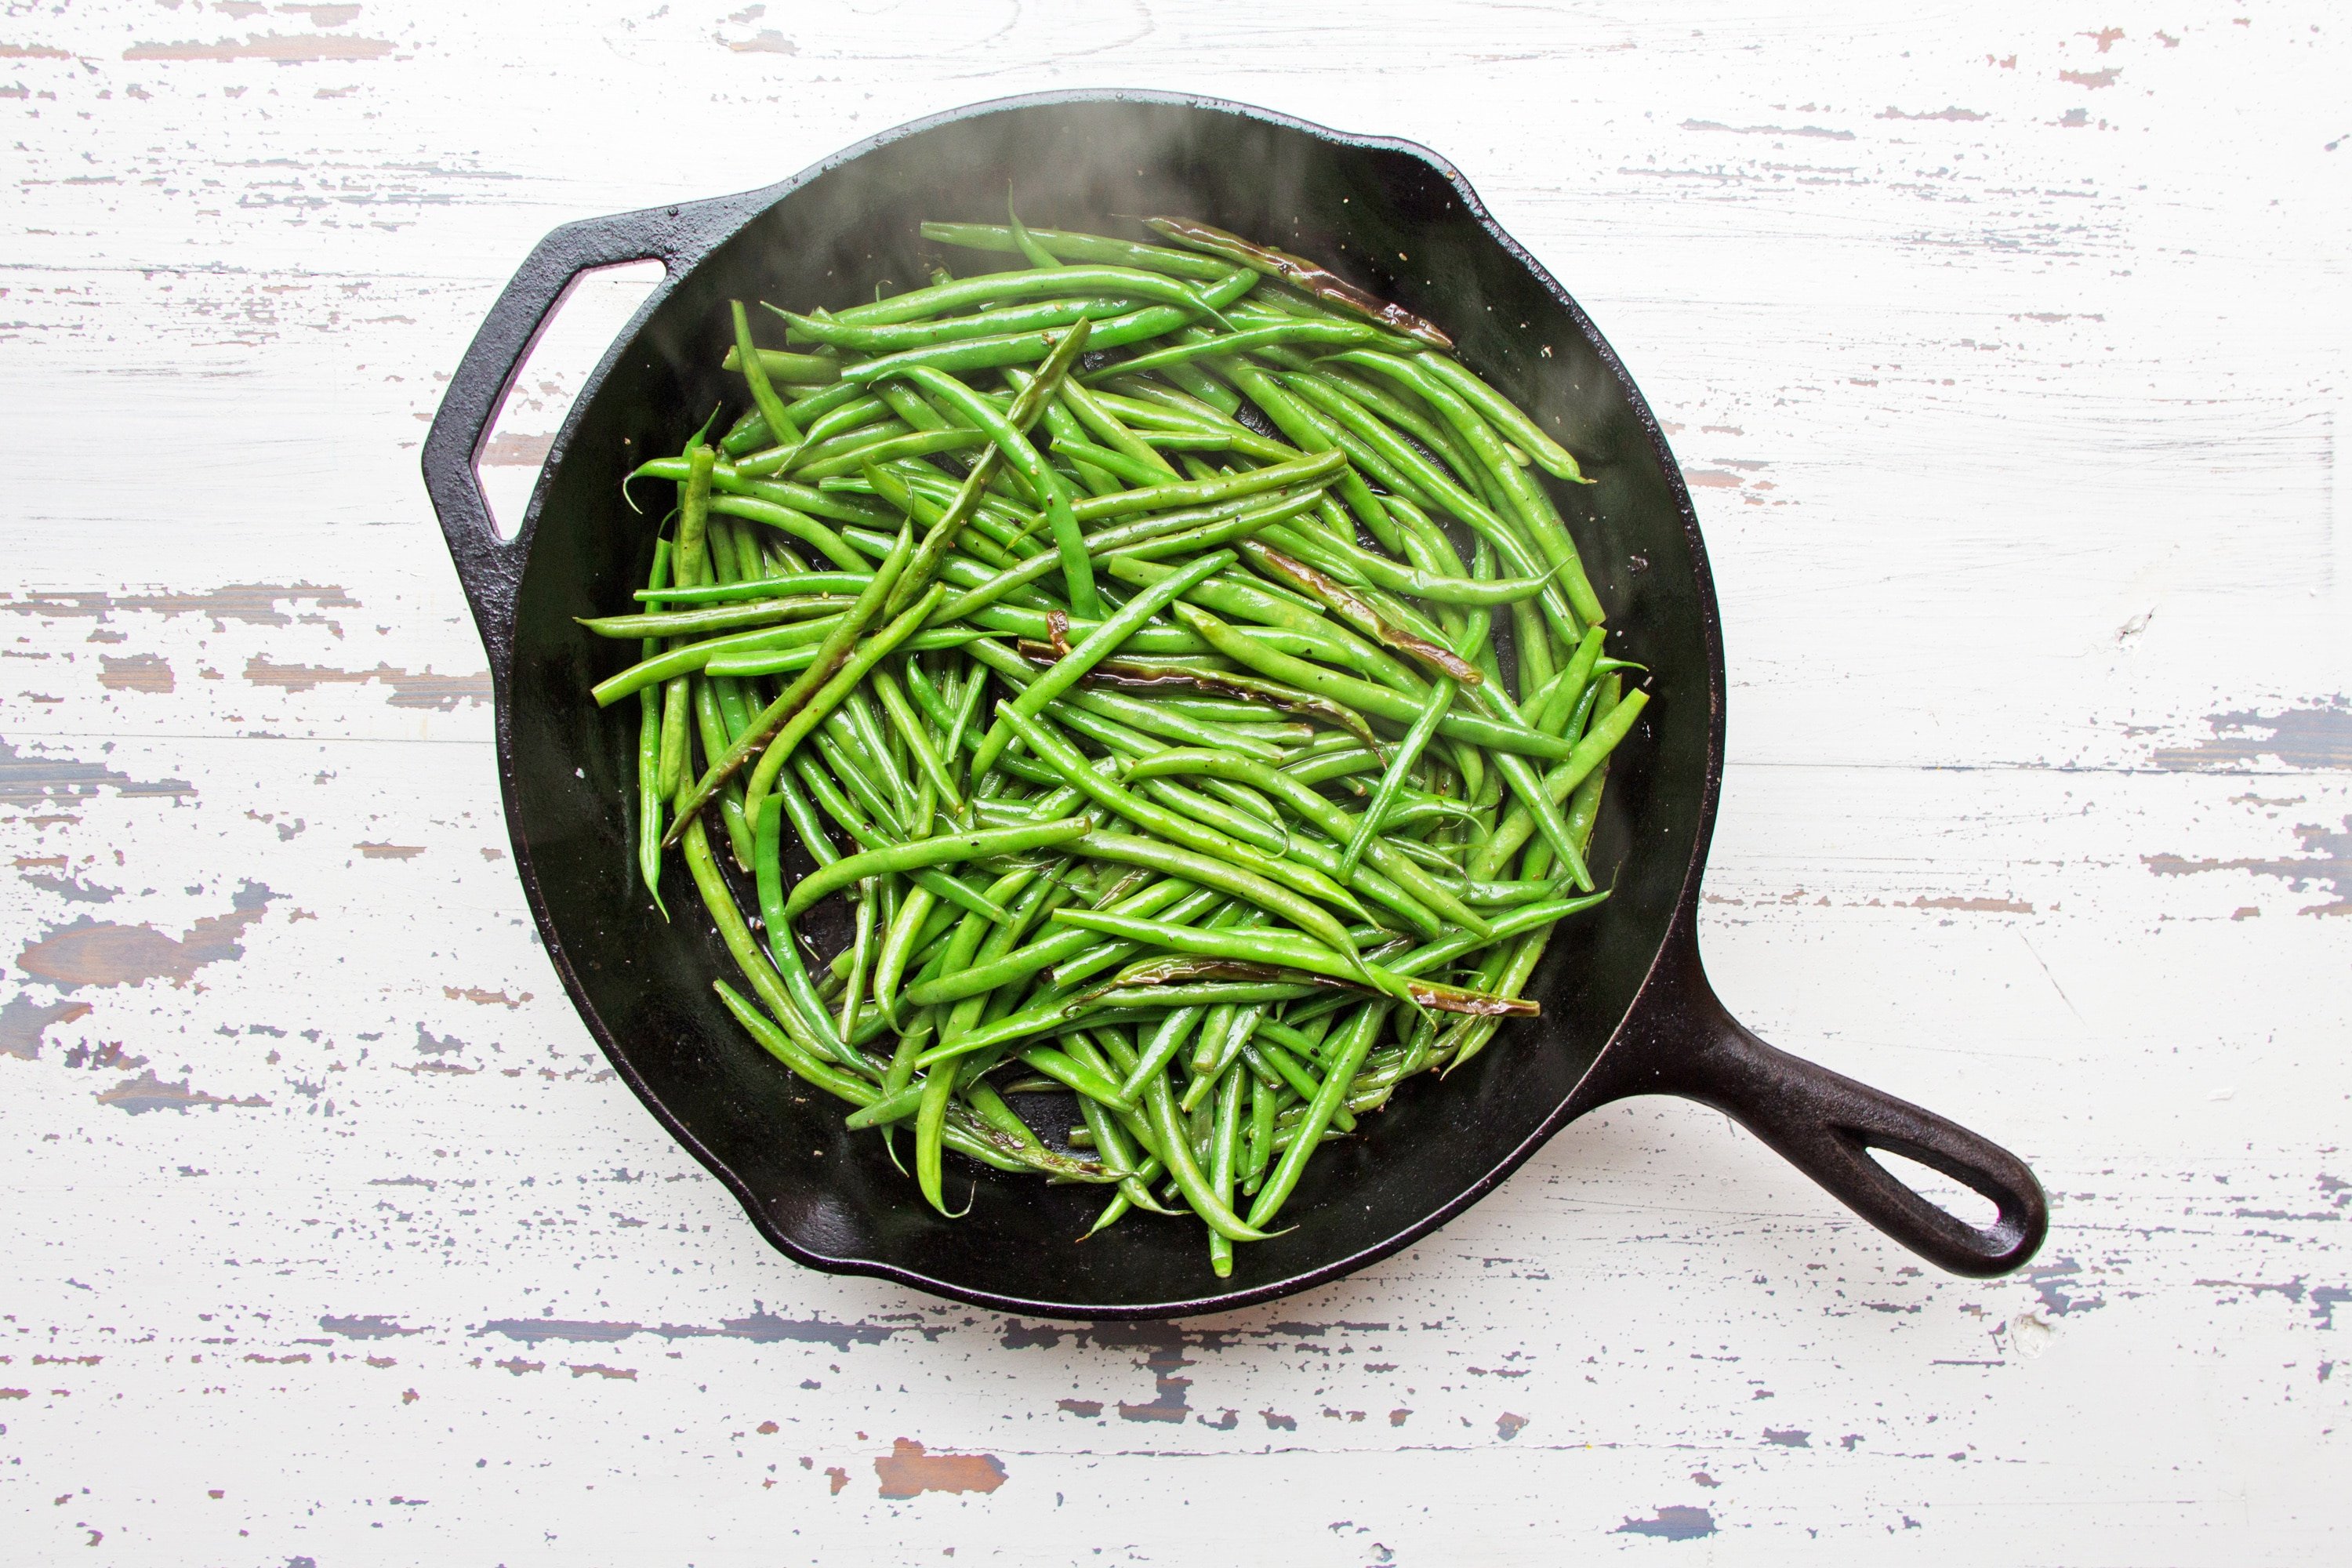 Sautéed Haricot Verts in steaming hot cast iron pan.